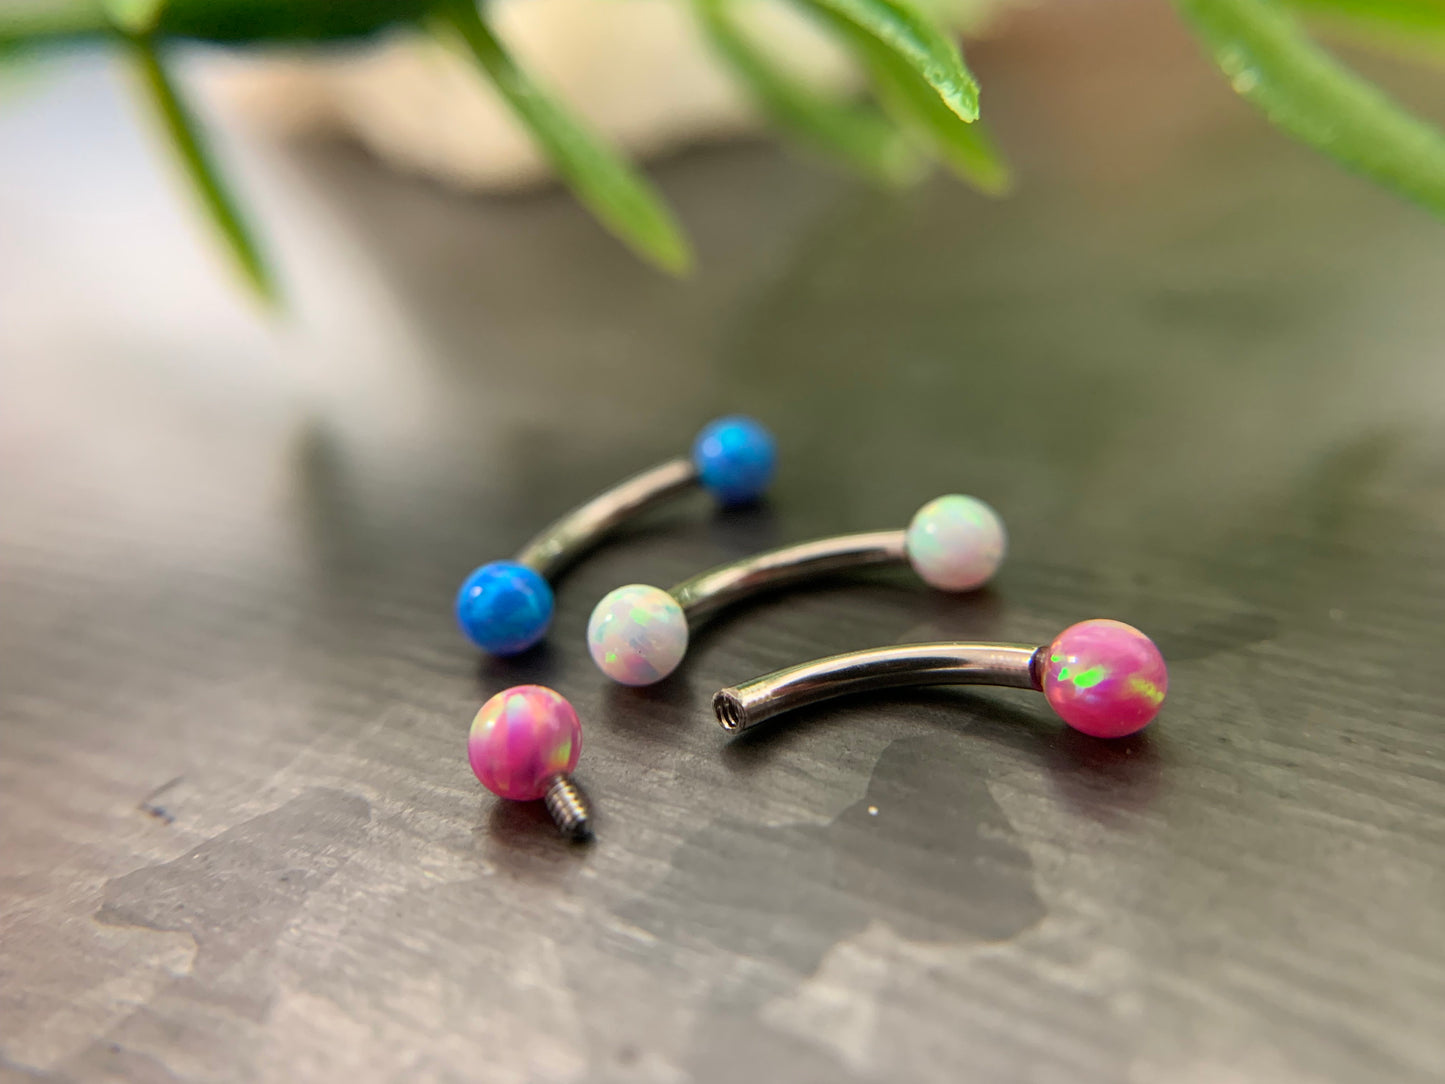 1 Piece Opal Balls Curved Surgical Steel Eyebrow Ring - 16g, 5/16" (8mm) - Blue, Pink or White - YOU Choose Color!!!